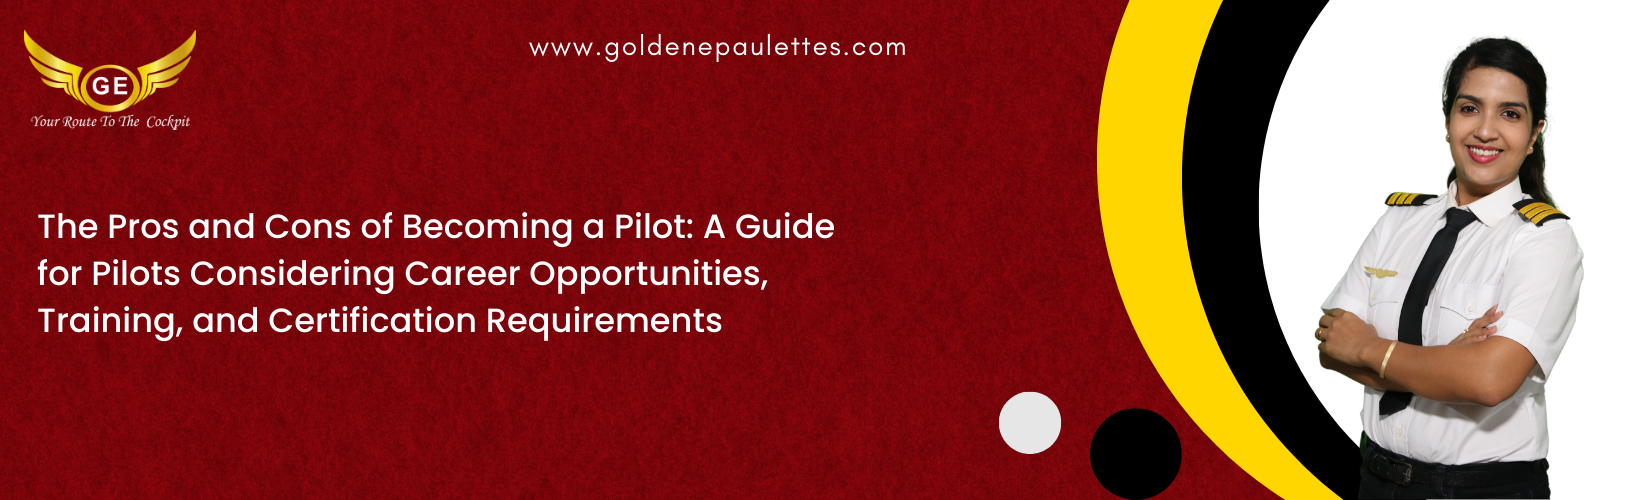 The Pros and Cons of Becoming a Pilot